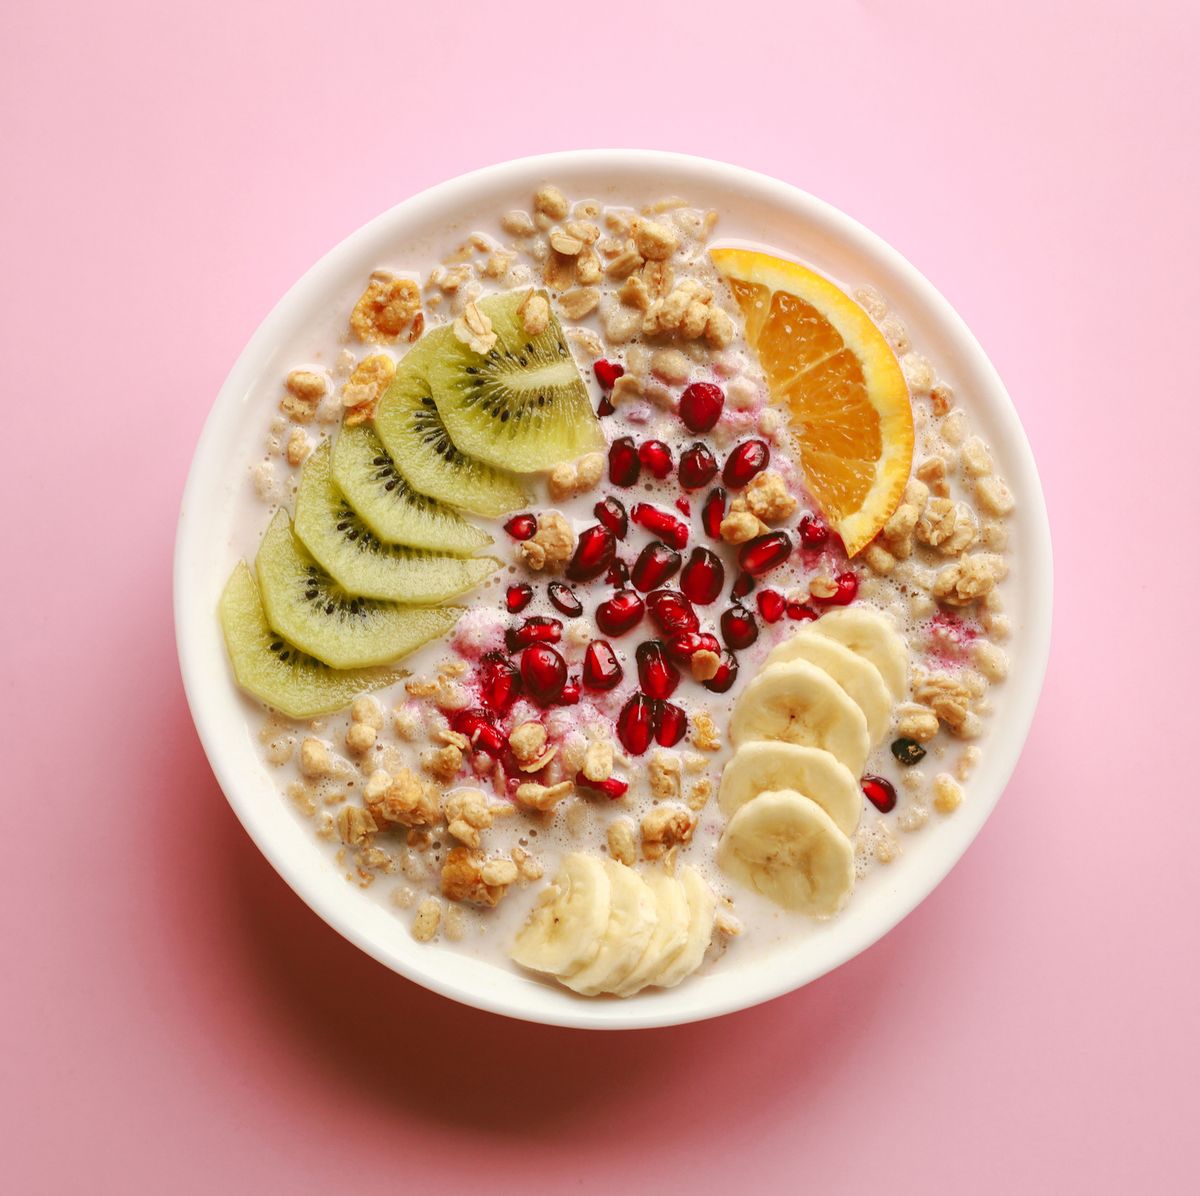 Healthy Fast Food Breakfast: Fuel Your Day with Nutritious Options